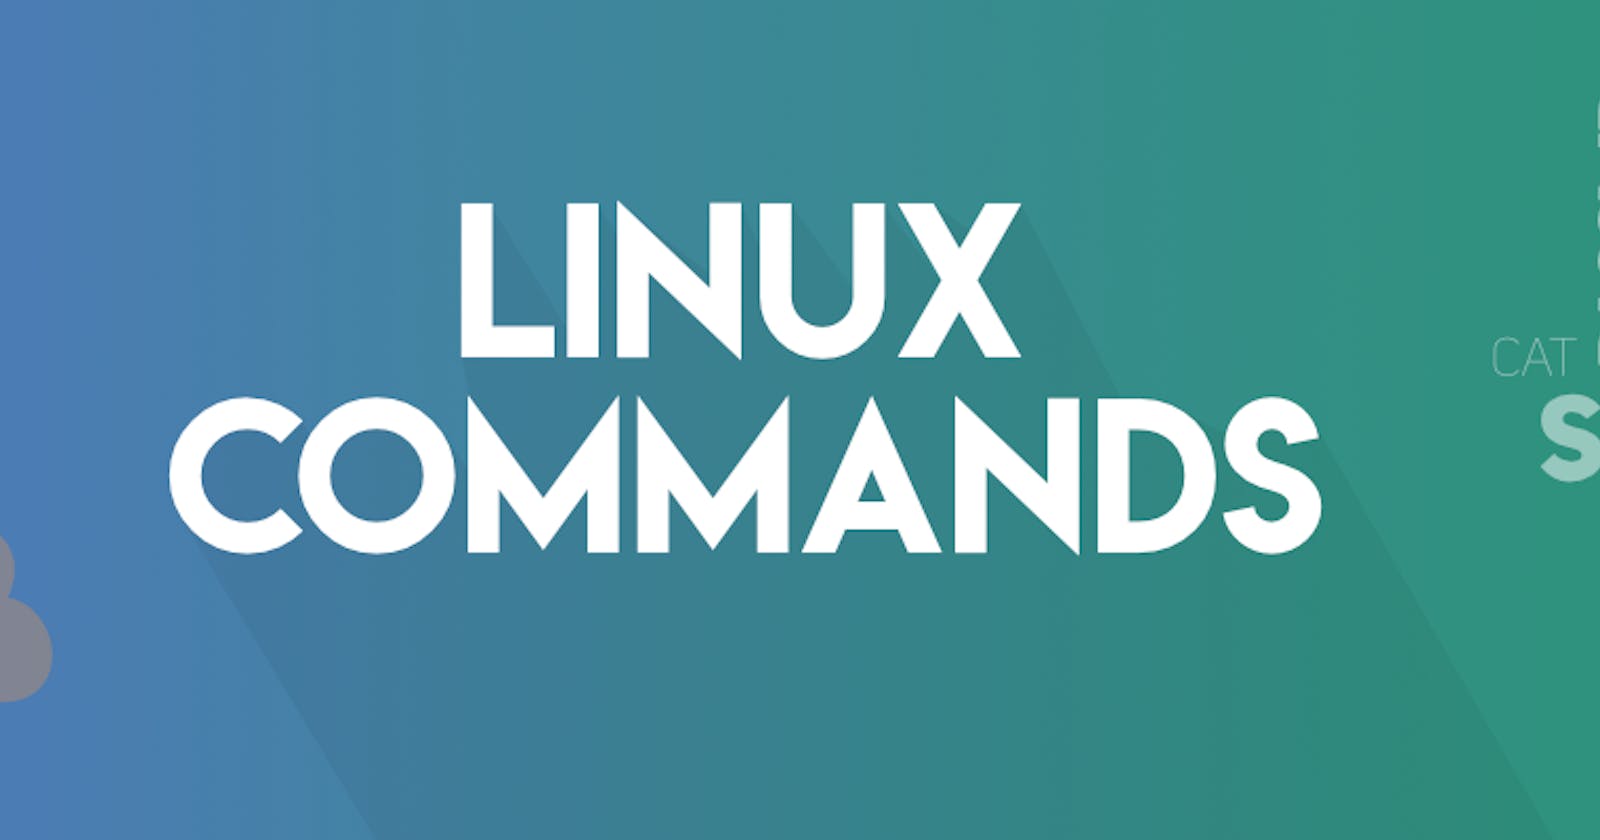 Day 3 : Basic Linux Commands